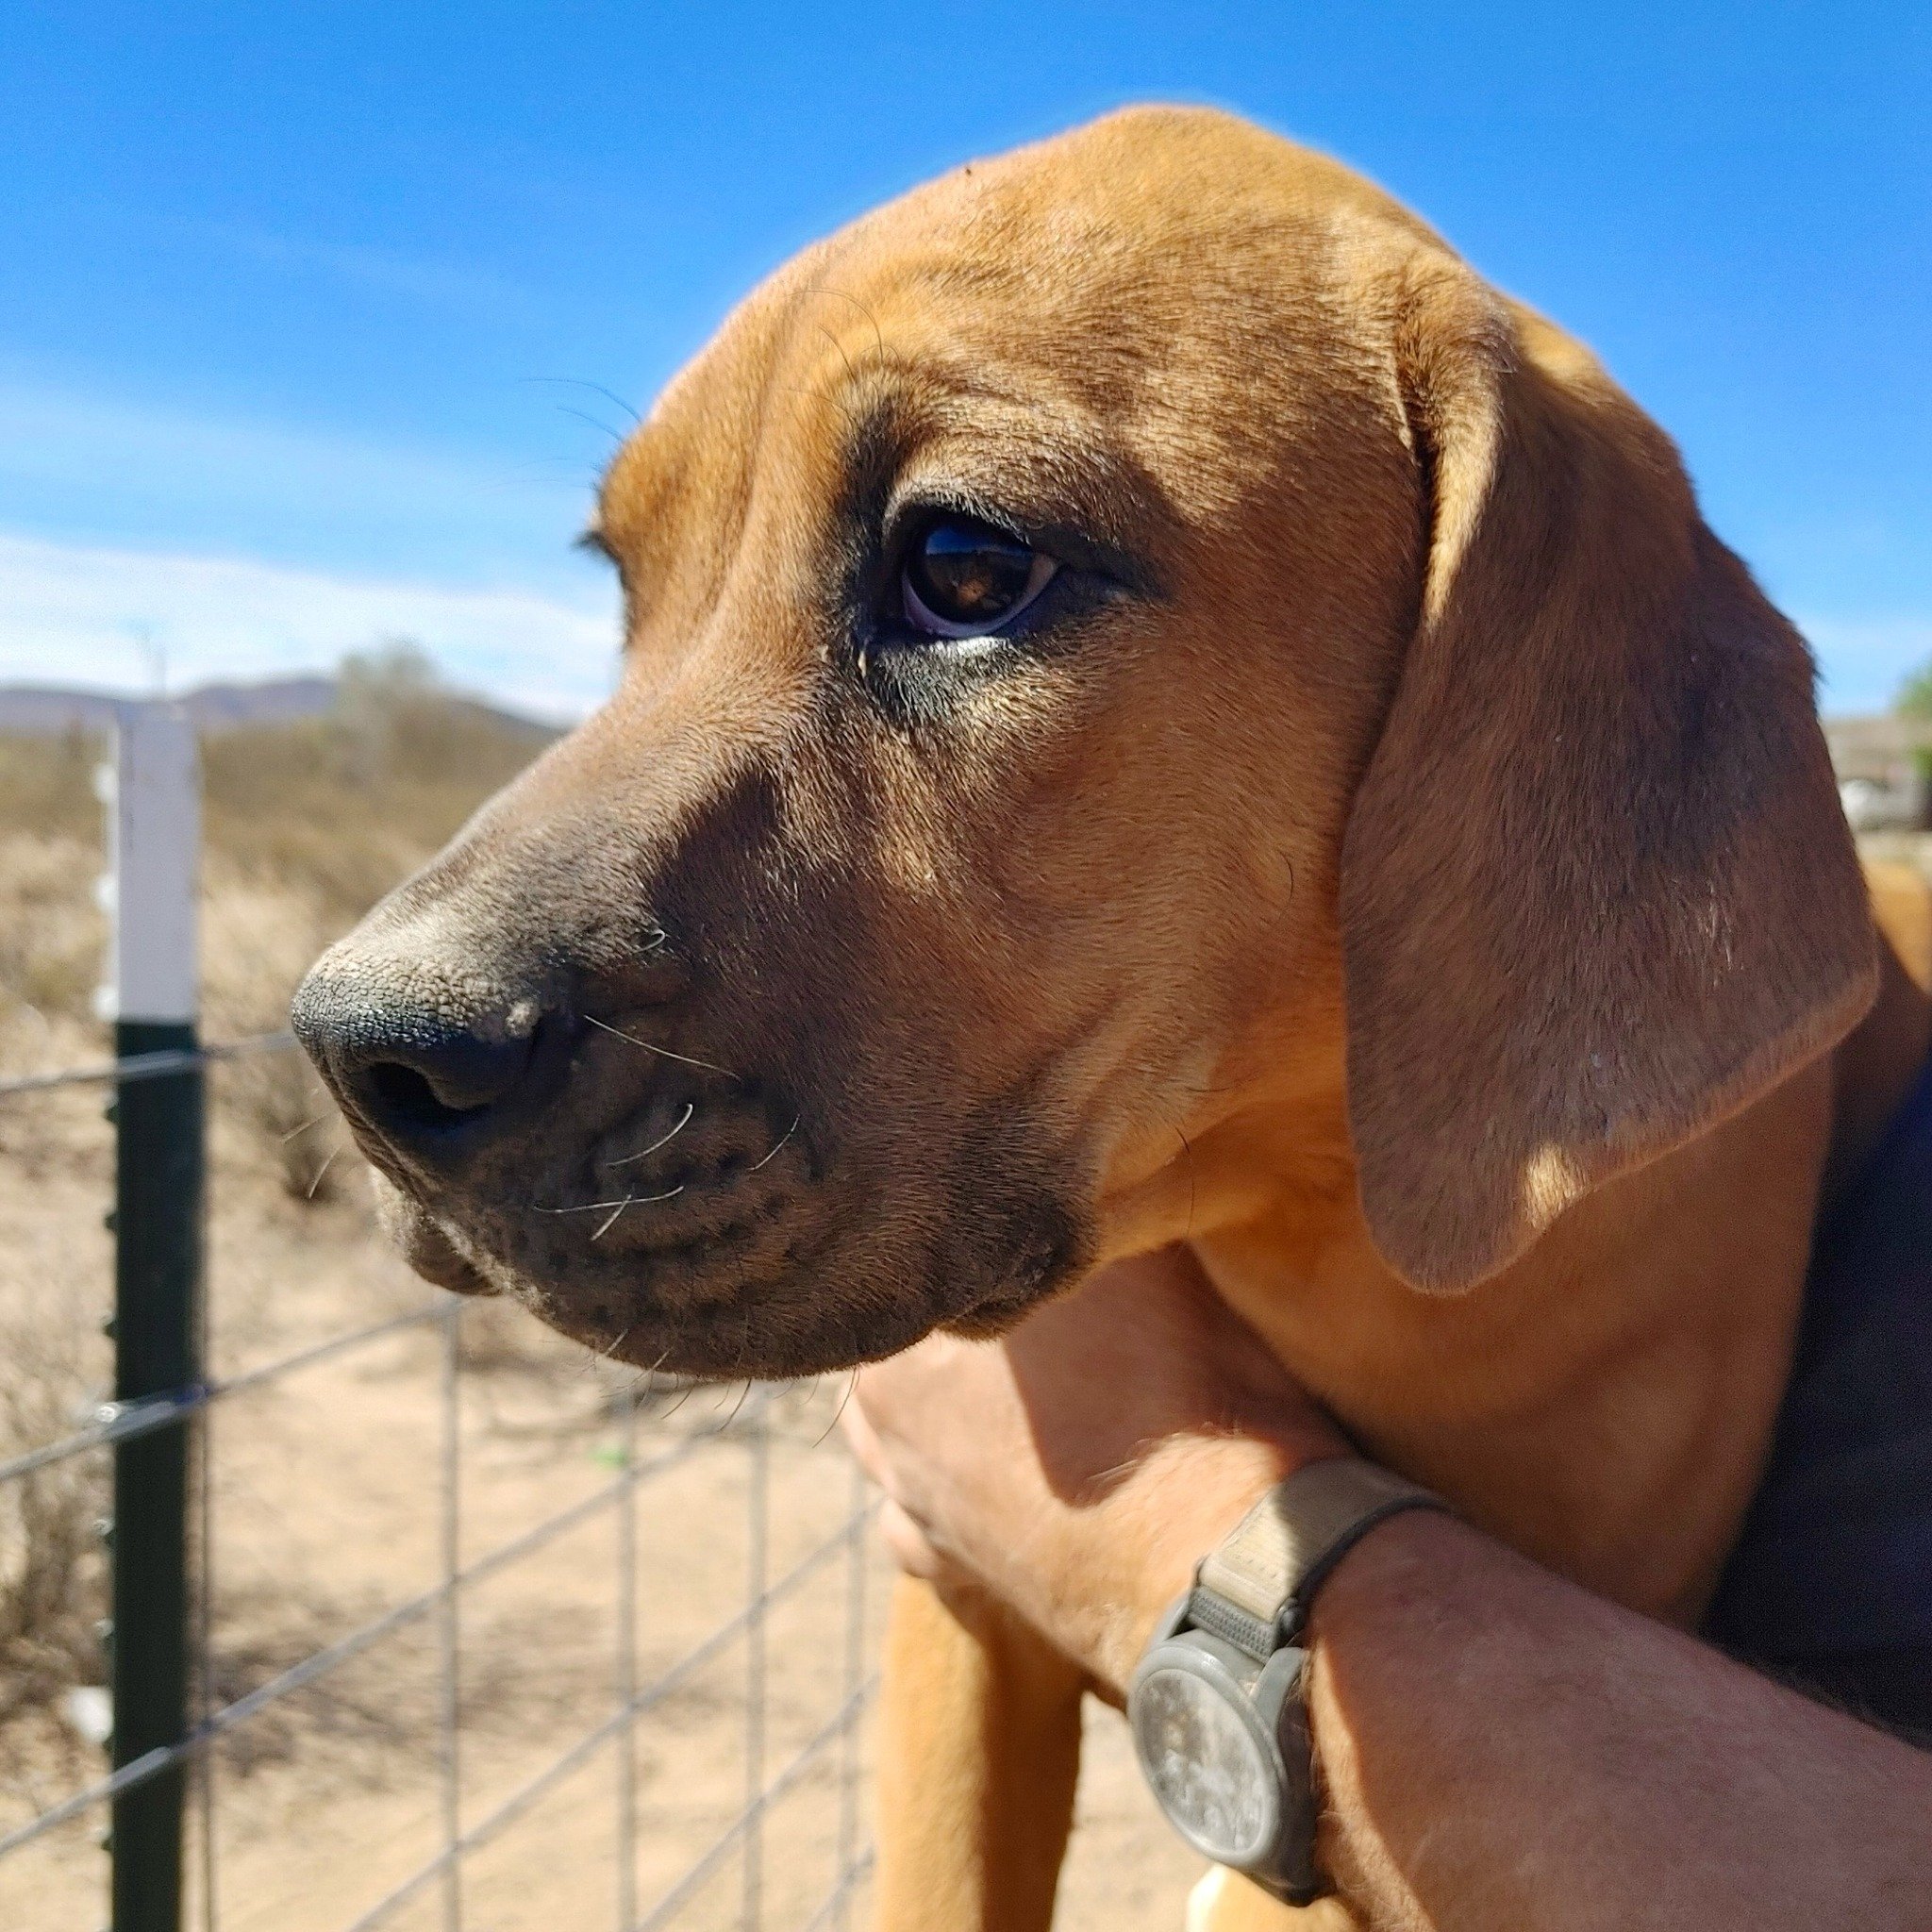 By the slimmest of margins (and don&rsquo;t hold us to it, it could change any minute) Pringle is our pick of the litter. This sweet boxer mix pup needs a great home. She&rsquo;s just shy of 6 months old and weighs 30 lbs. Reach out about adoption! (